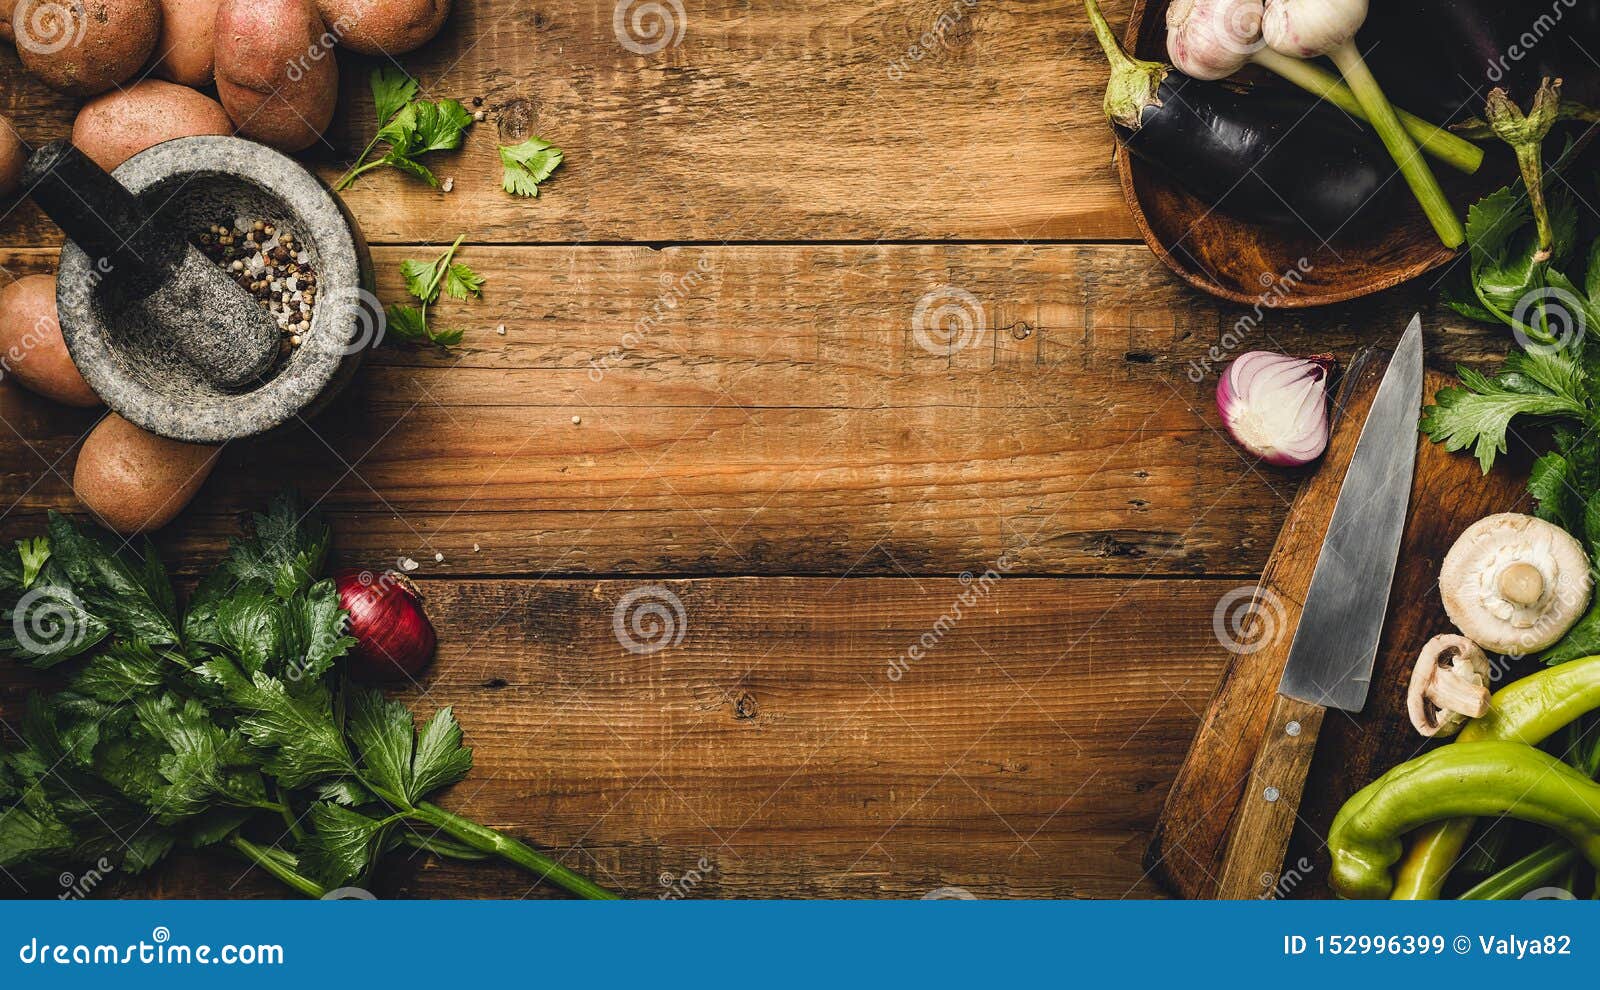 Ingredients for Cooking Raw Vegetables on a Wooden Table, Top View ...